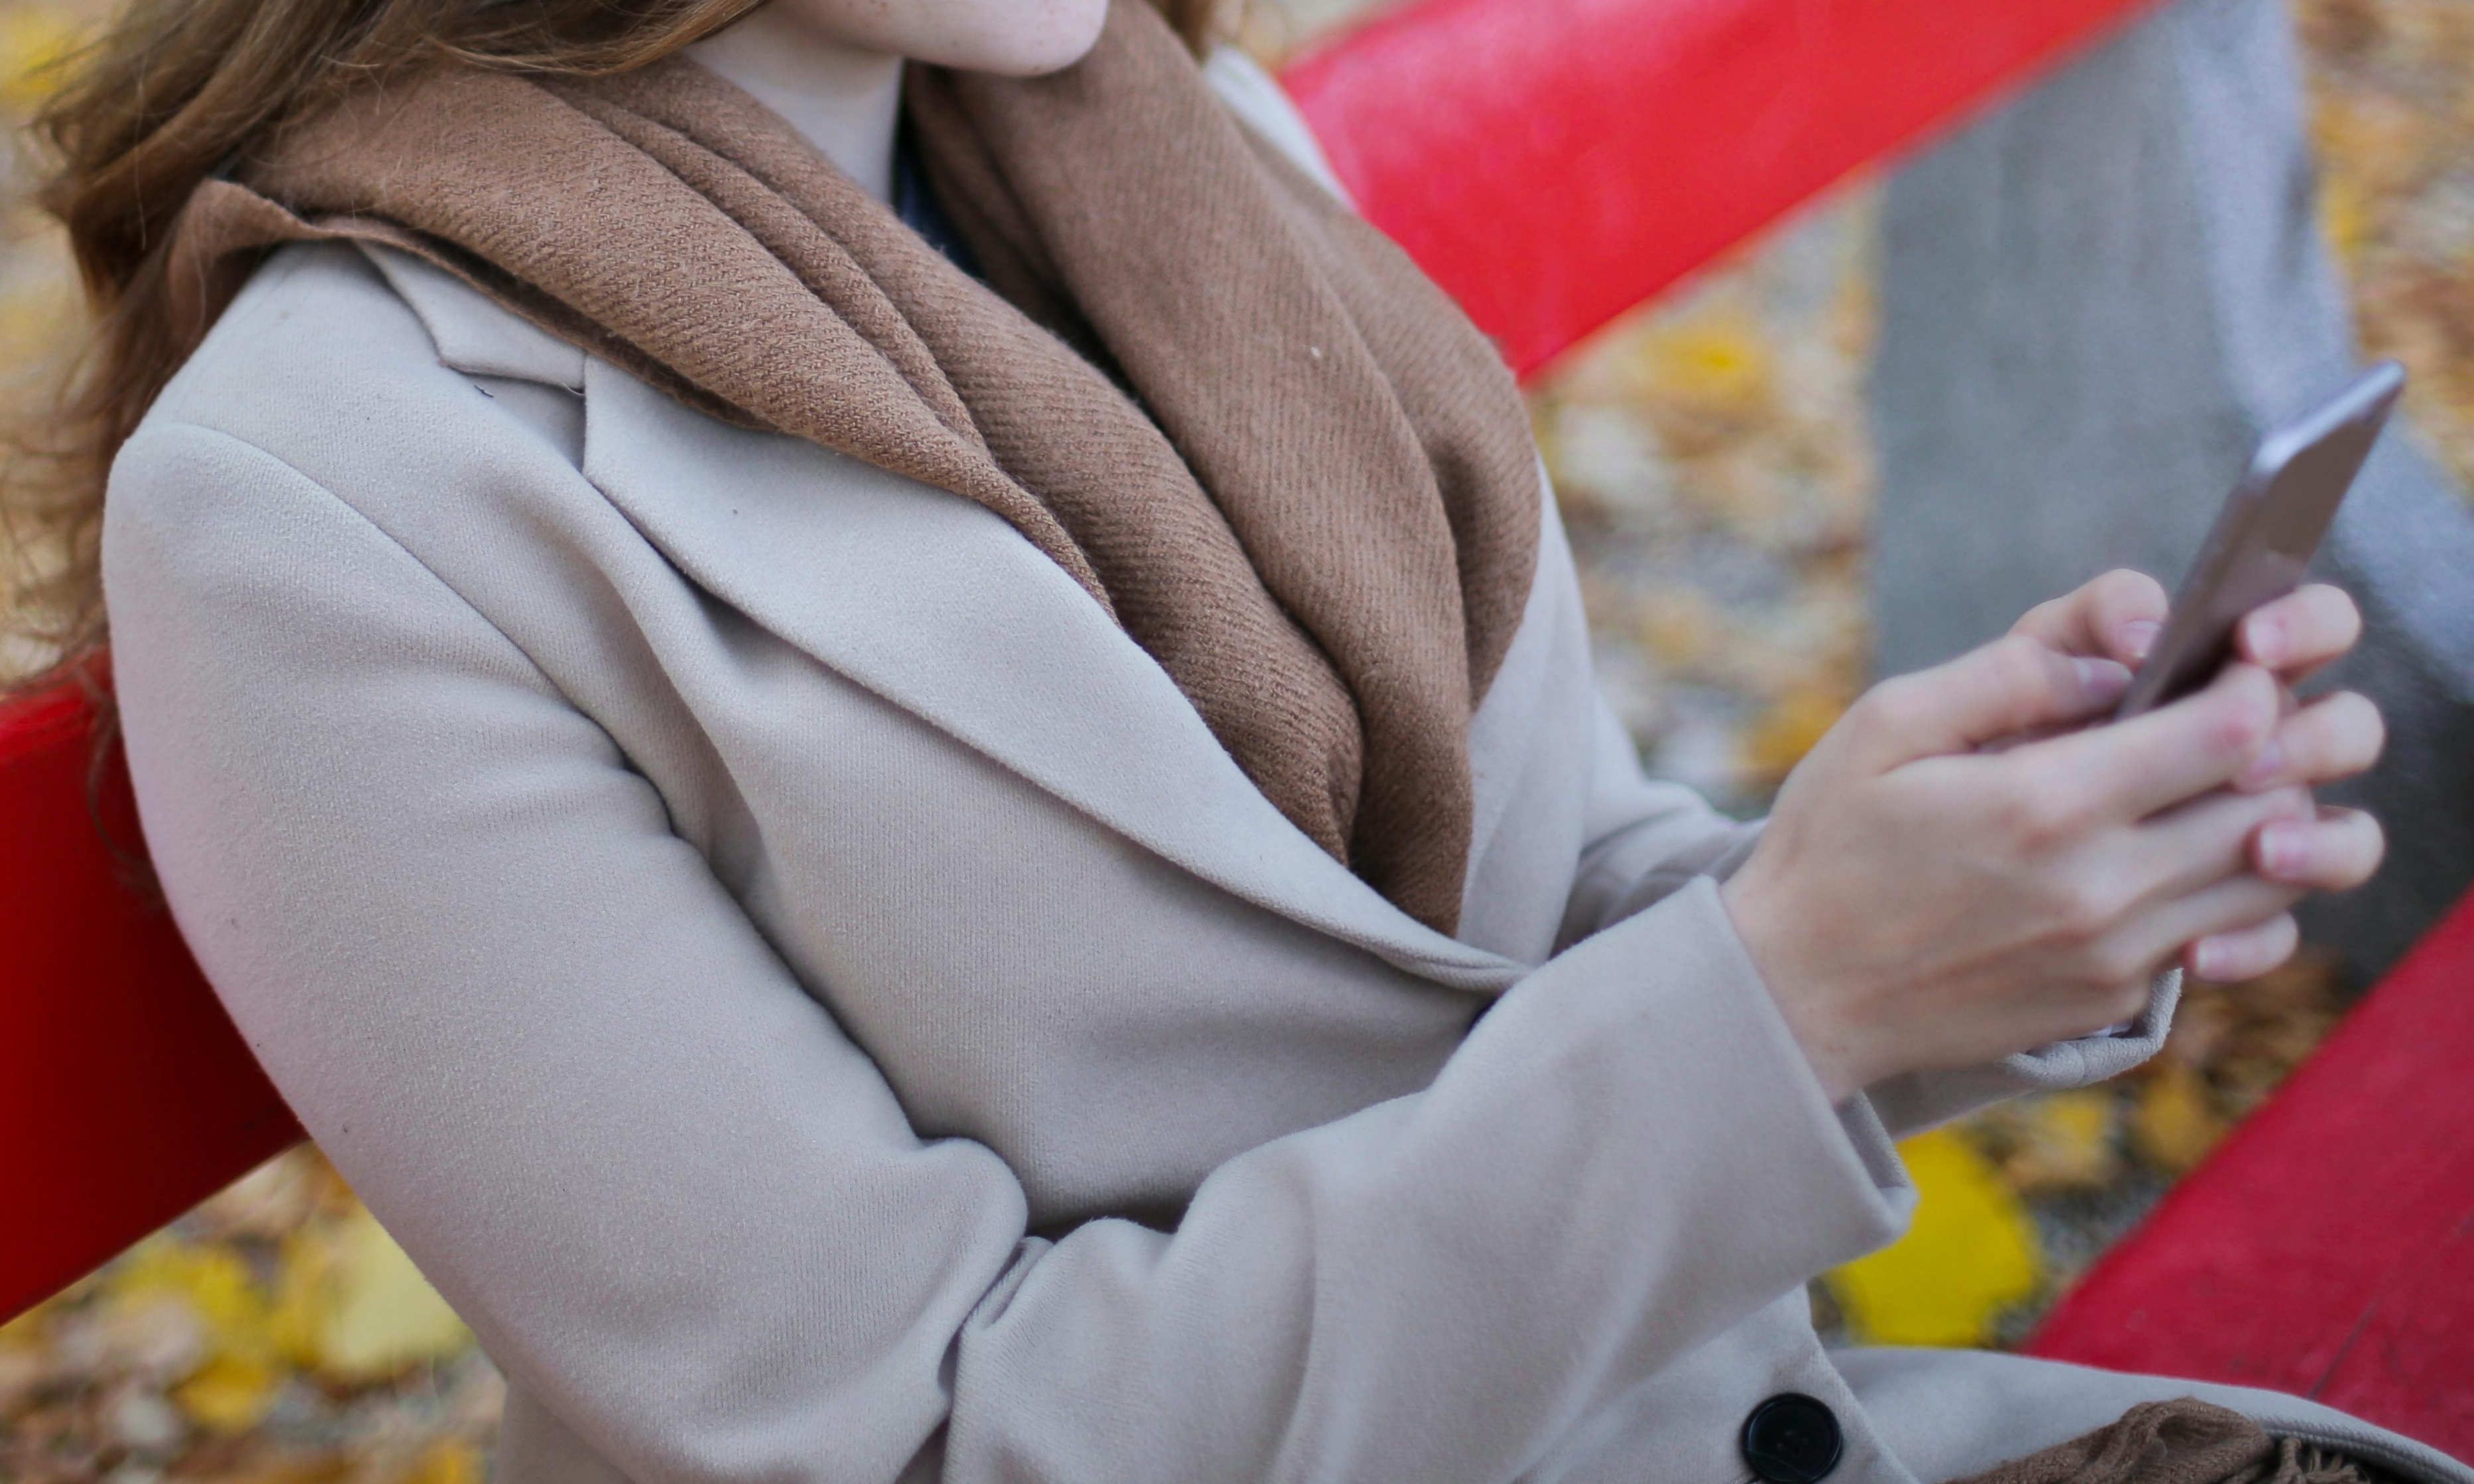 An woman sitting on a park bench with a cell phone in her hands | Source: Pexels